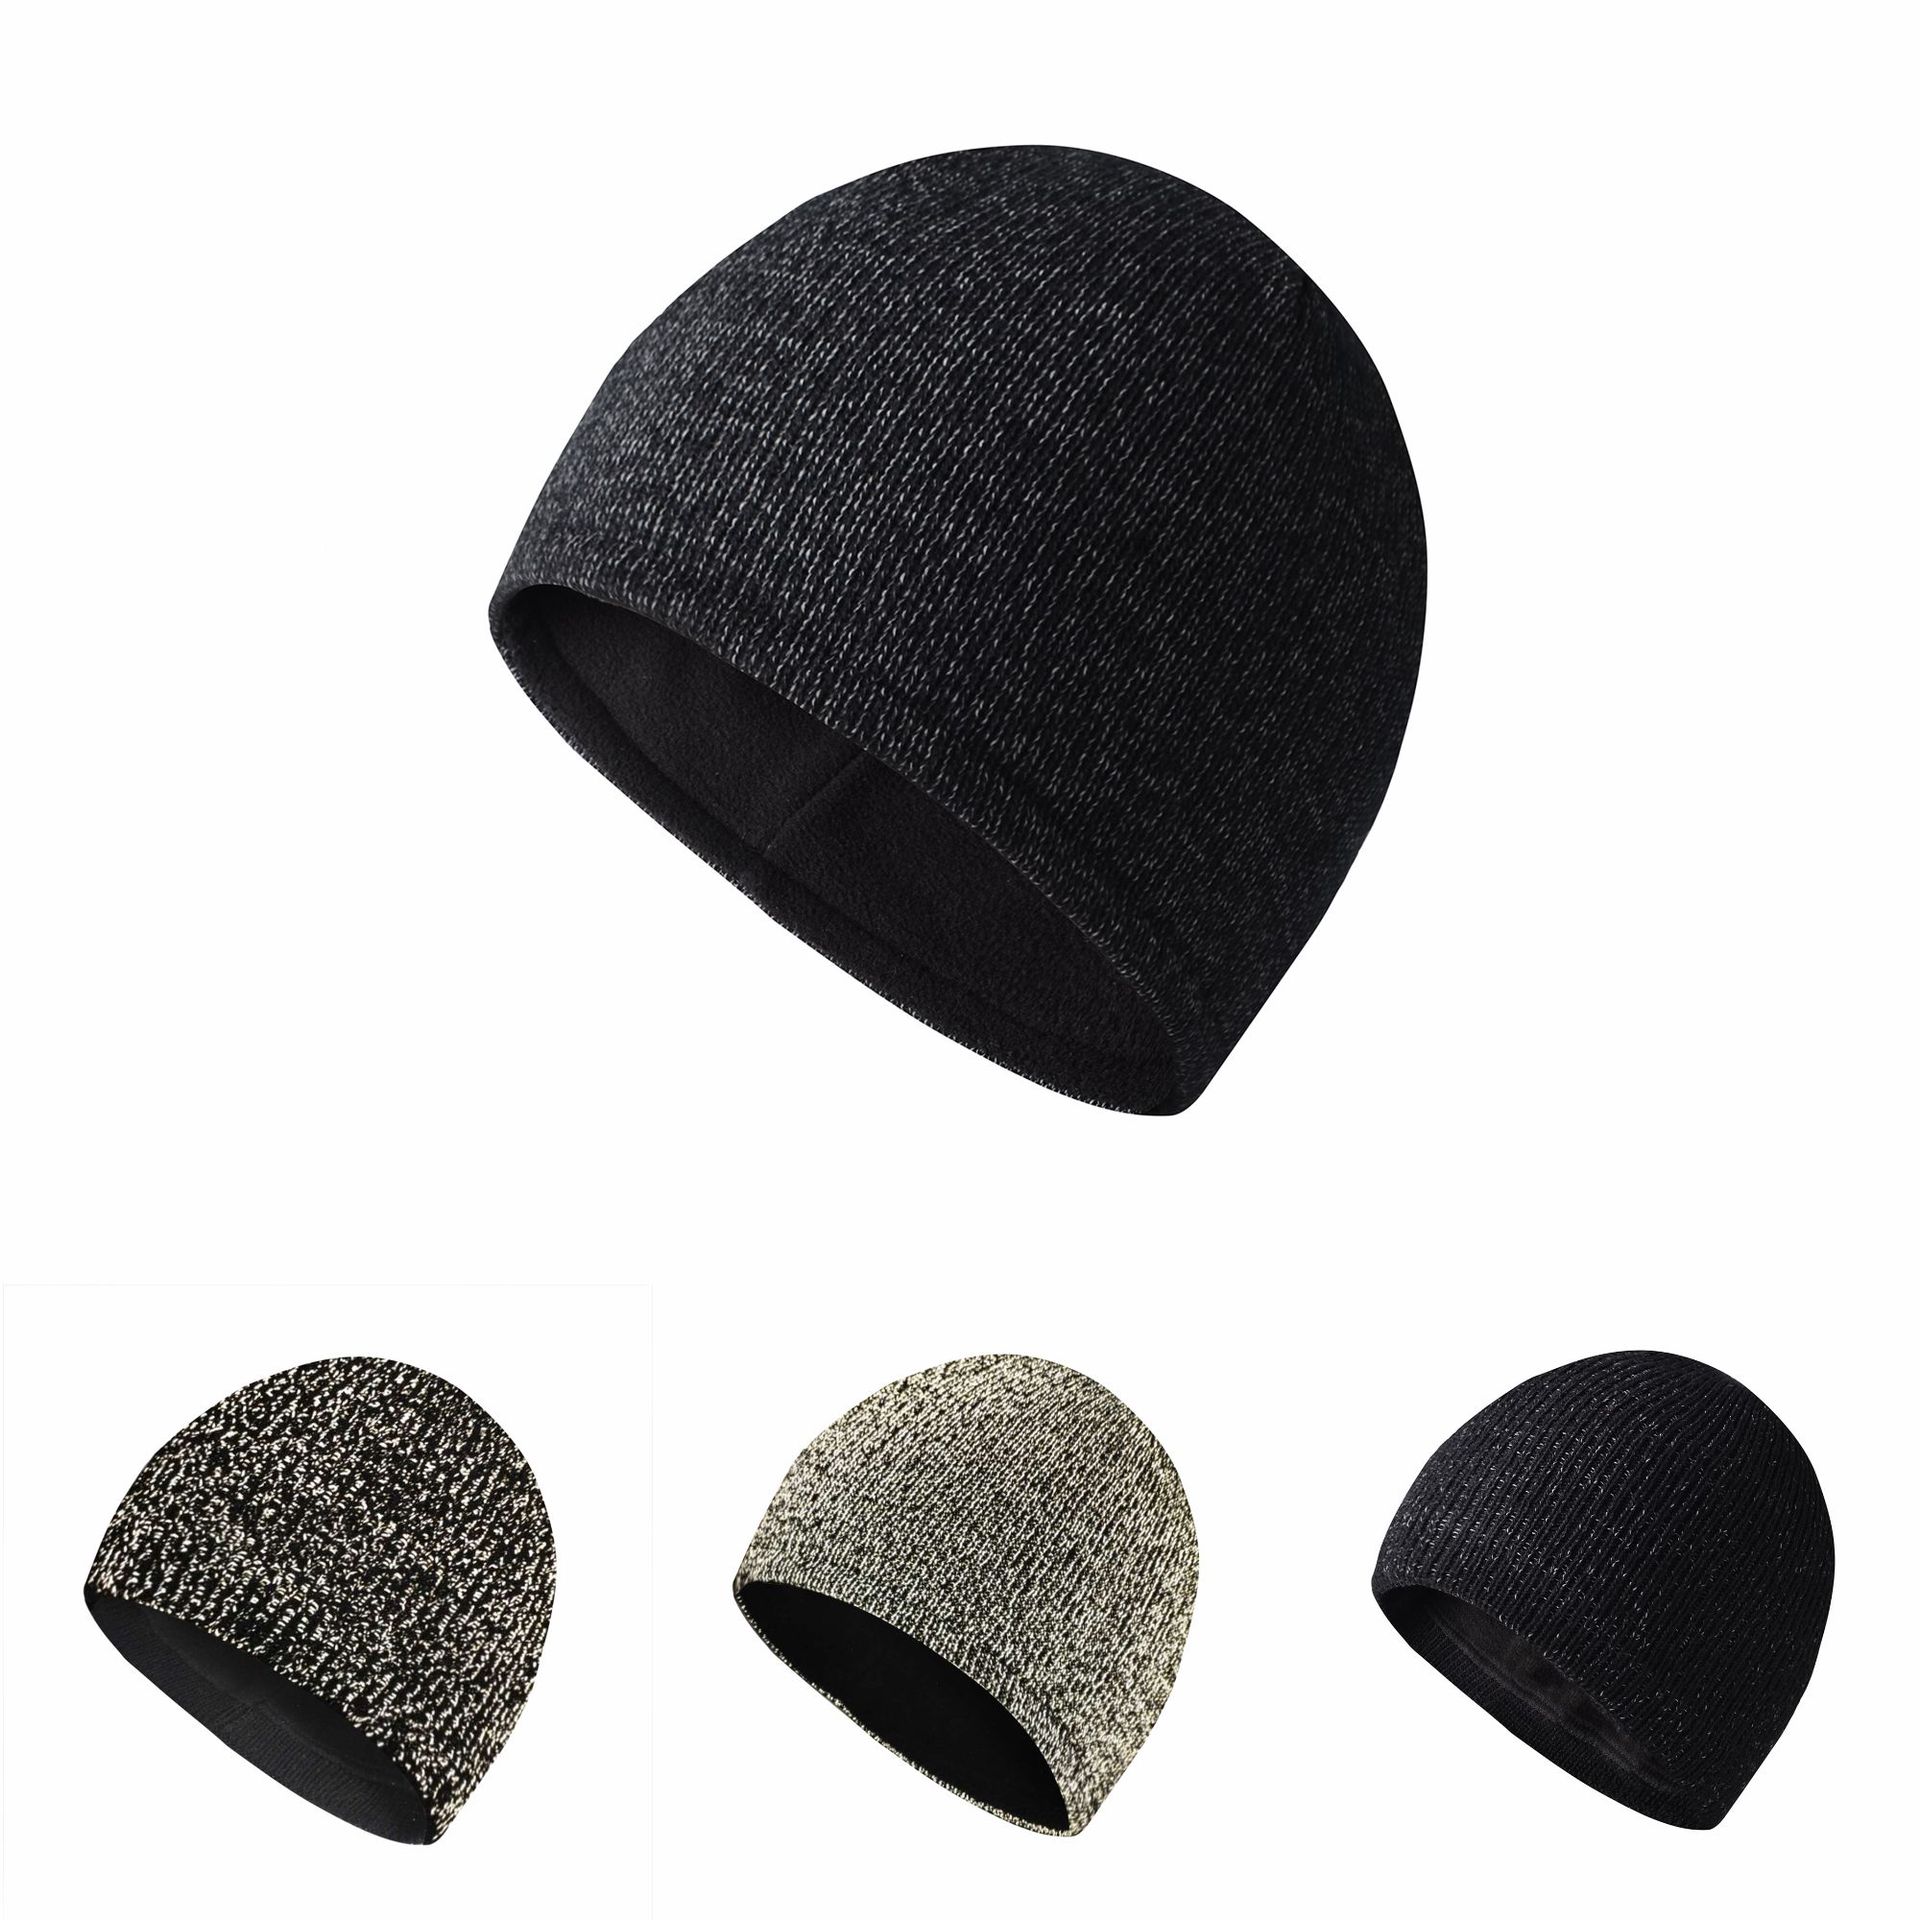 Reflective Knit Hat Safety Beanies High Visibility Beanie Knit Caps with Reflective Thread